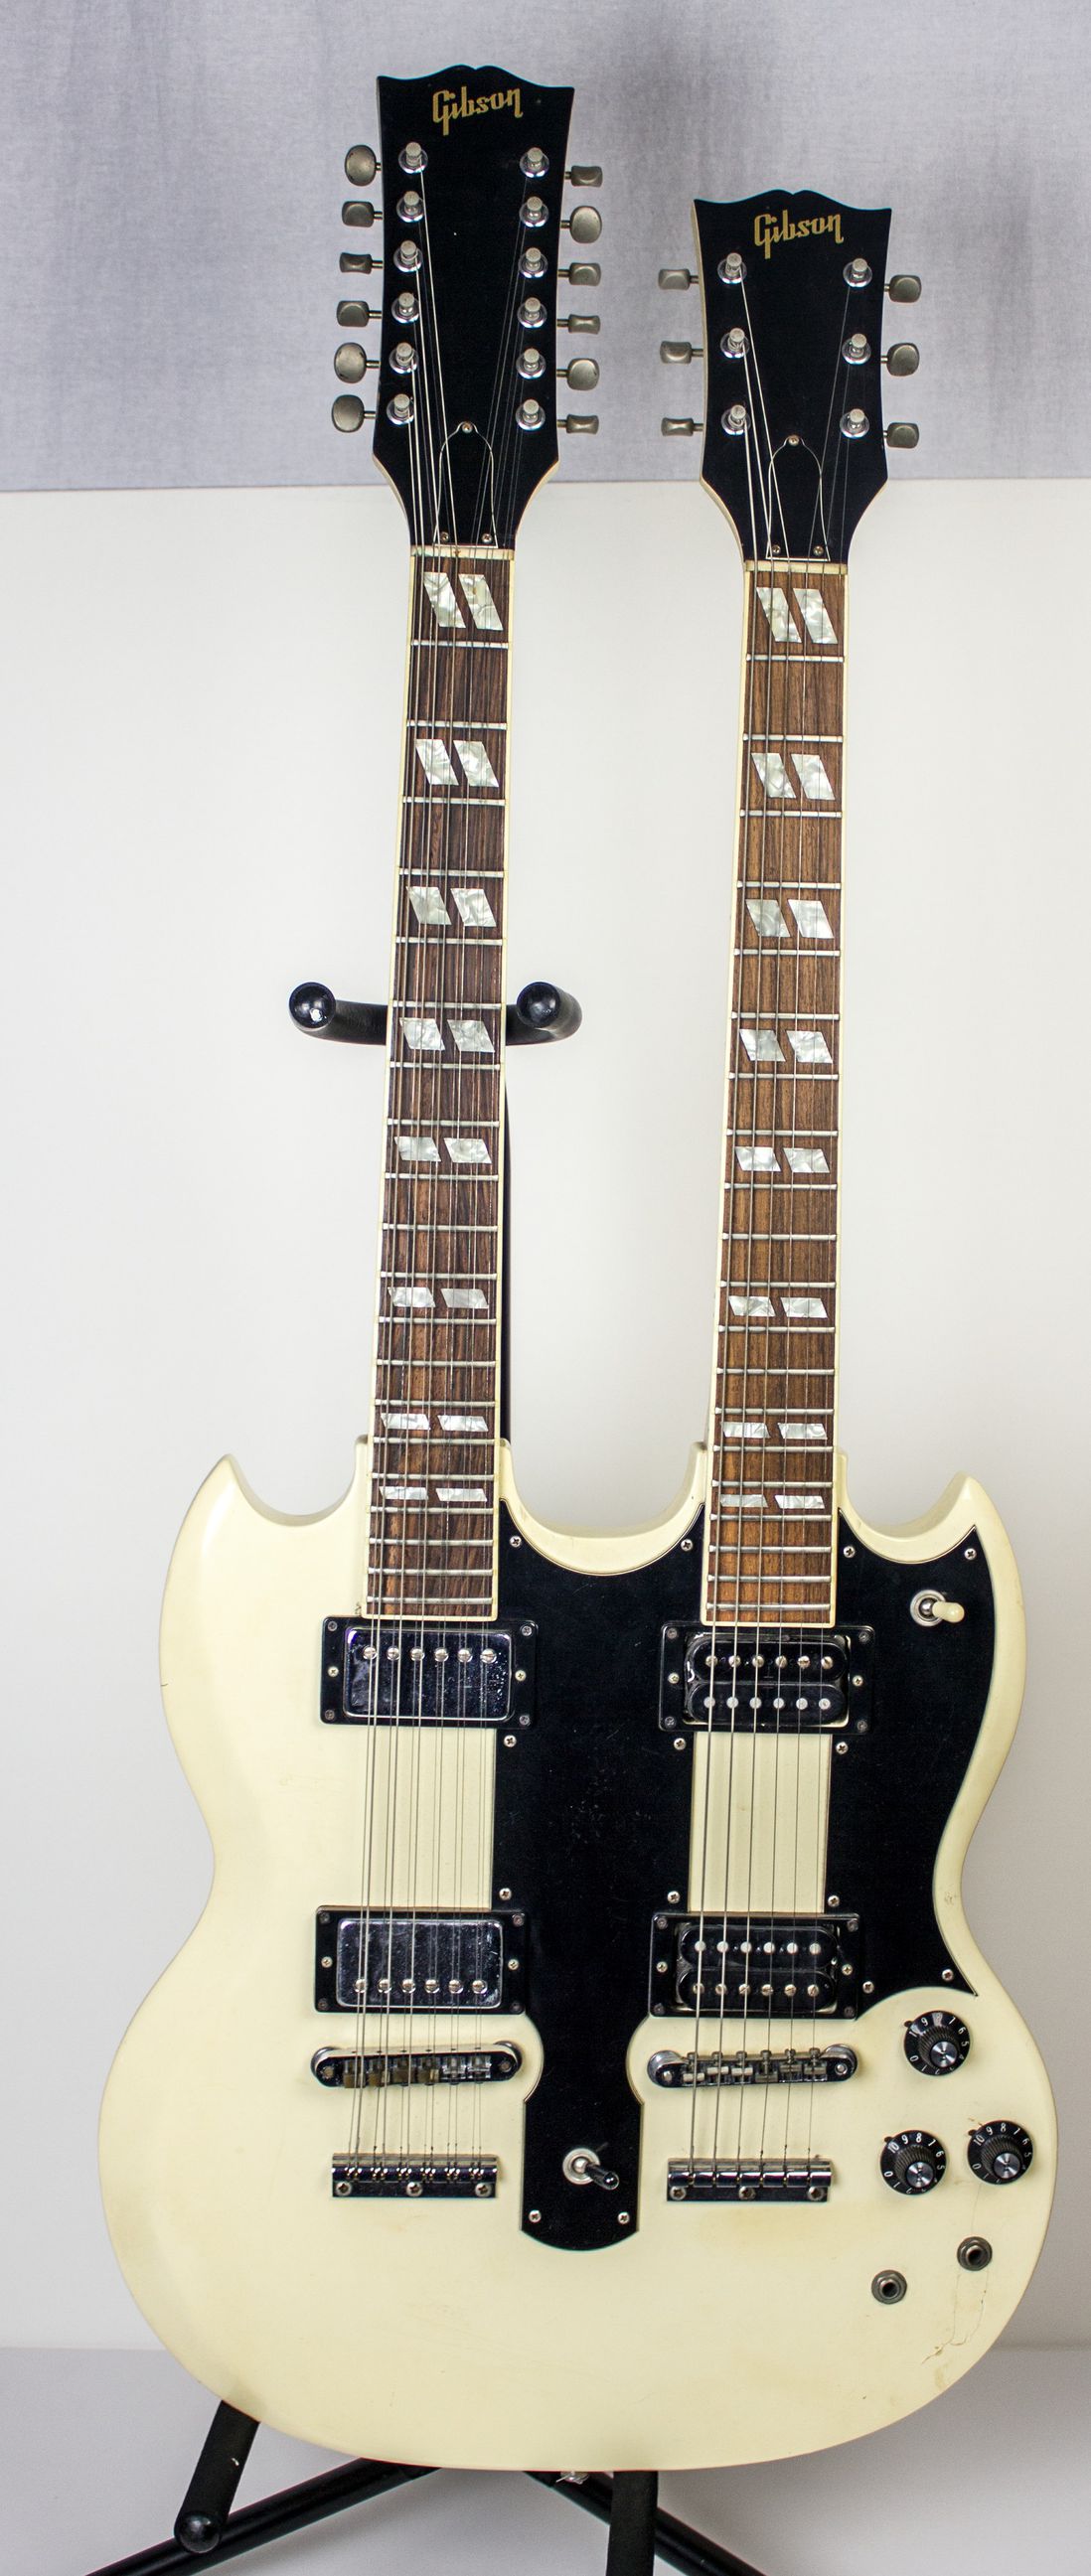 Don Felder of the Eagles used this white double-neck Gibson guitar in order to play both the six string and twelve string parts of “Hotel California” in live performances.